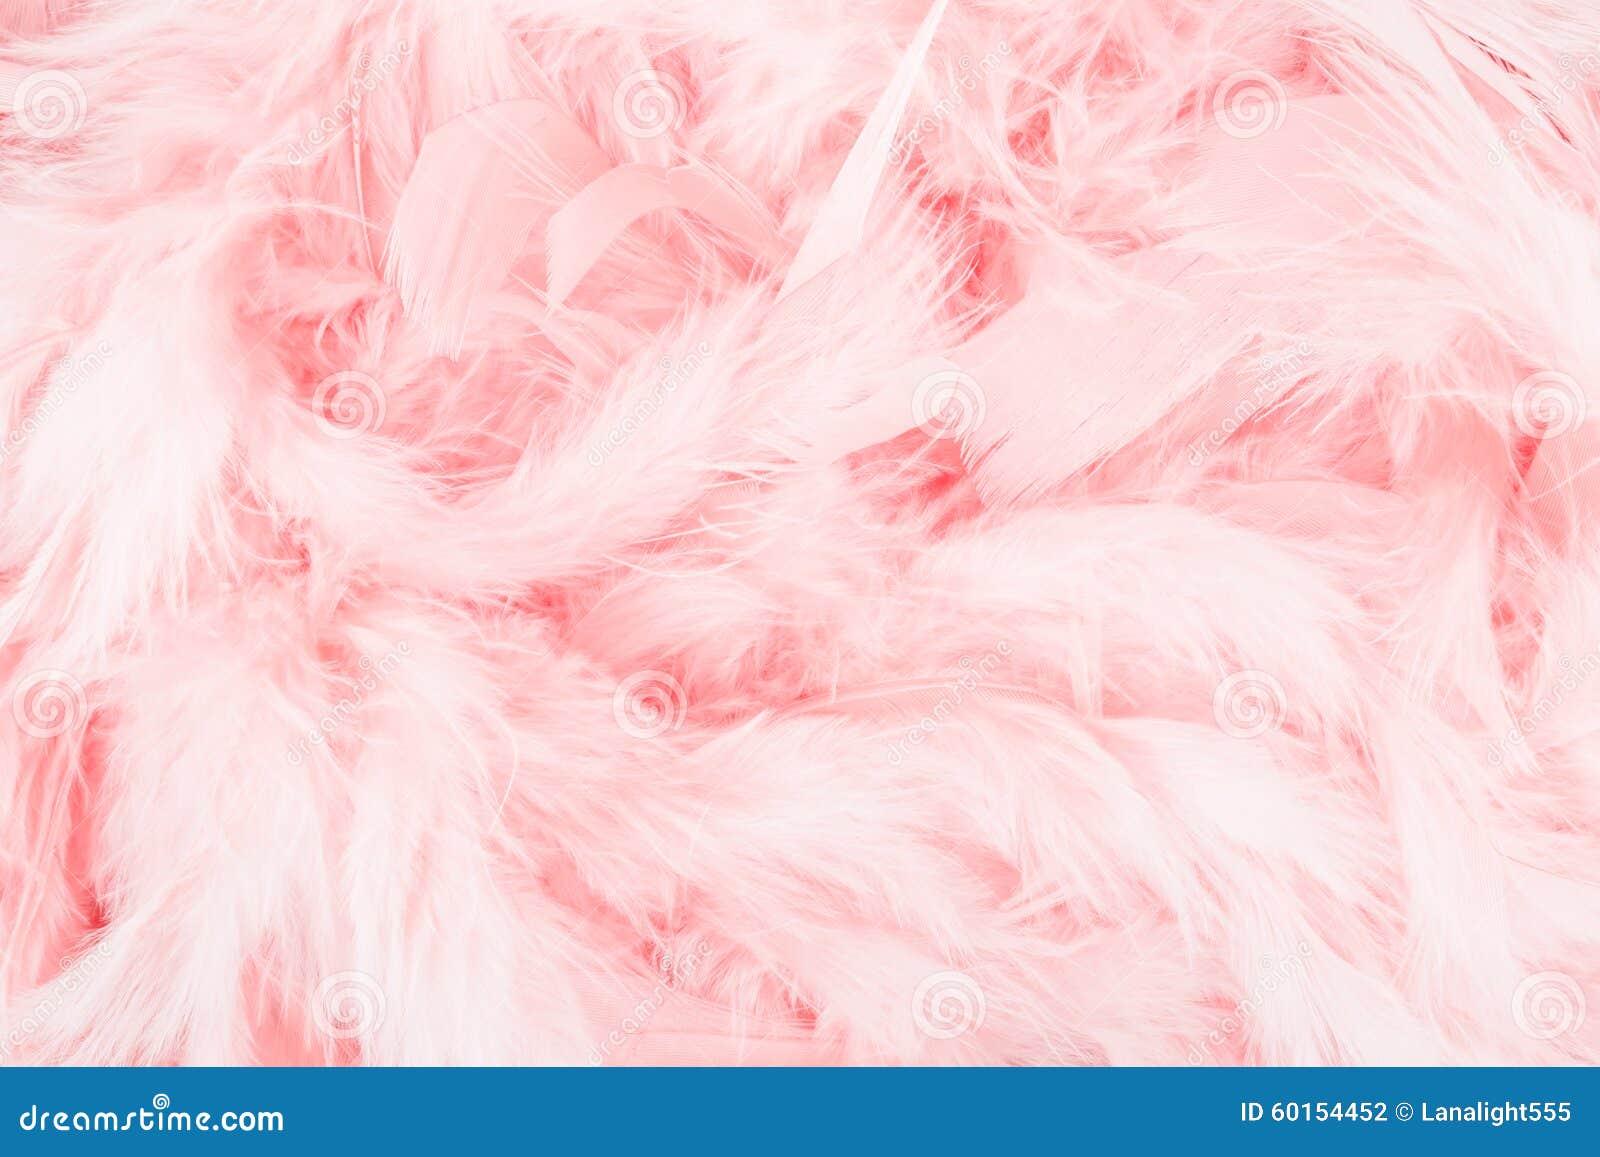 Pink feather background stock photo. Image of light, pattern - 60154452